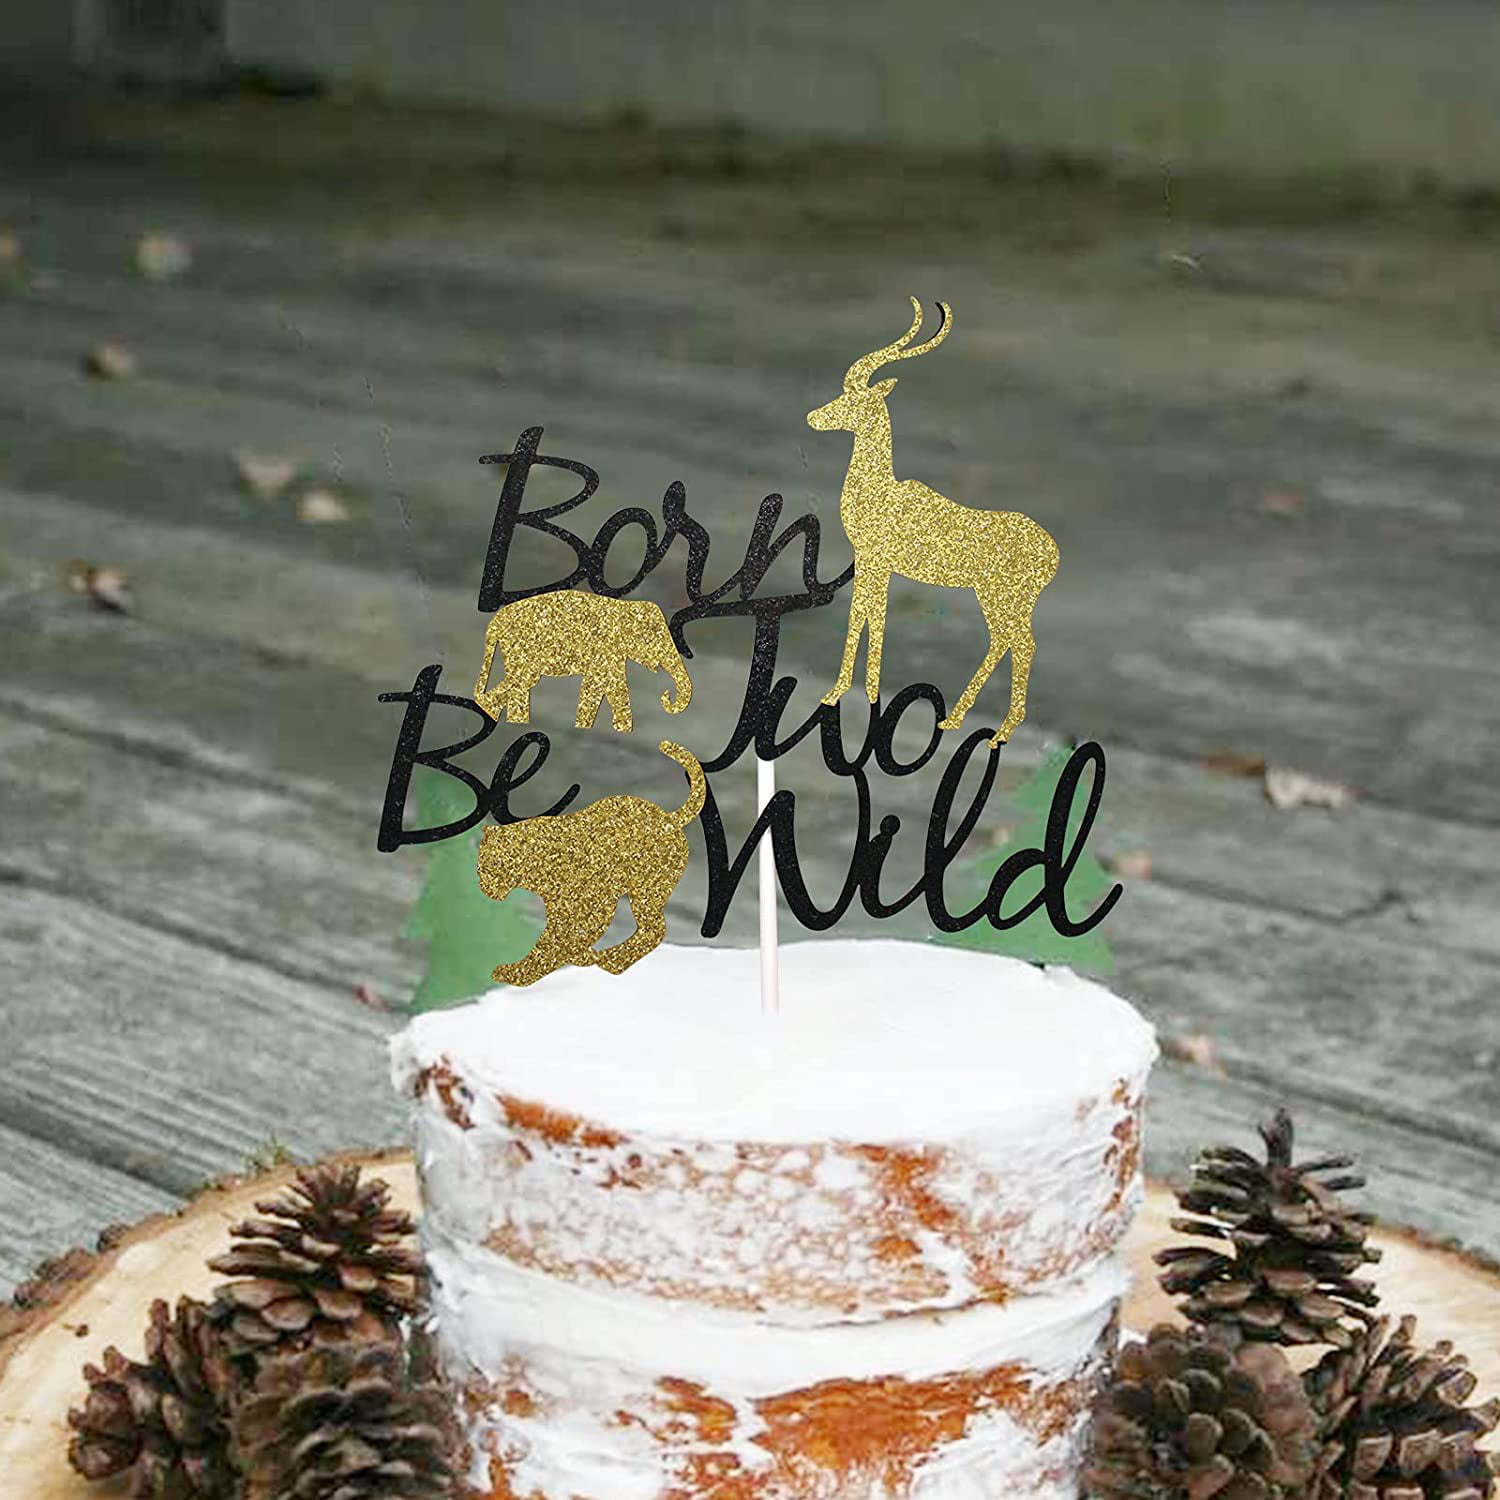 Gold Glitter Twins Cake Decor Born Two Be Wild Cake Topper Twins Baby Shower Supplies Safari Woodland Themed Twins 1st Birthday Party Decorations